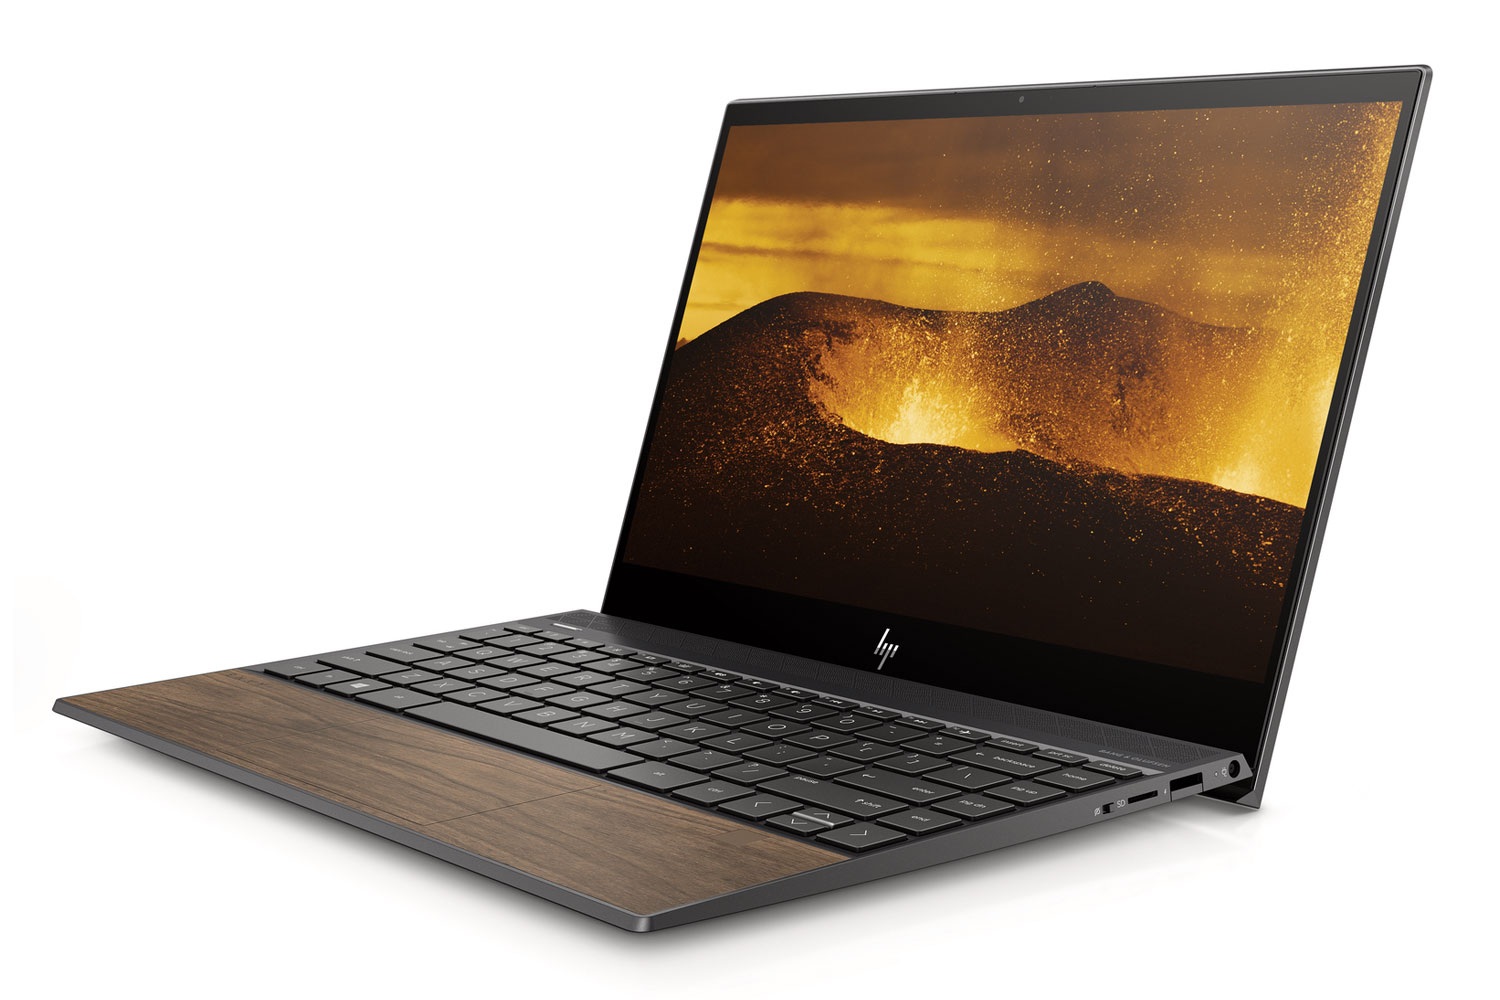 HP Announces Envy 13 Laptop Made of Wood